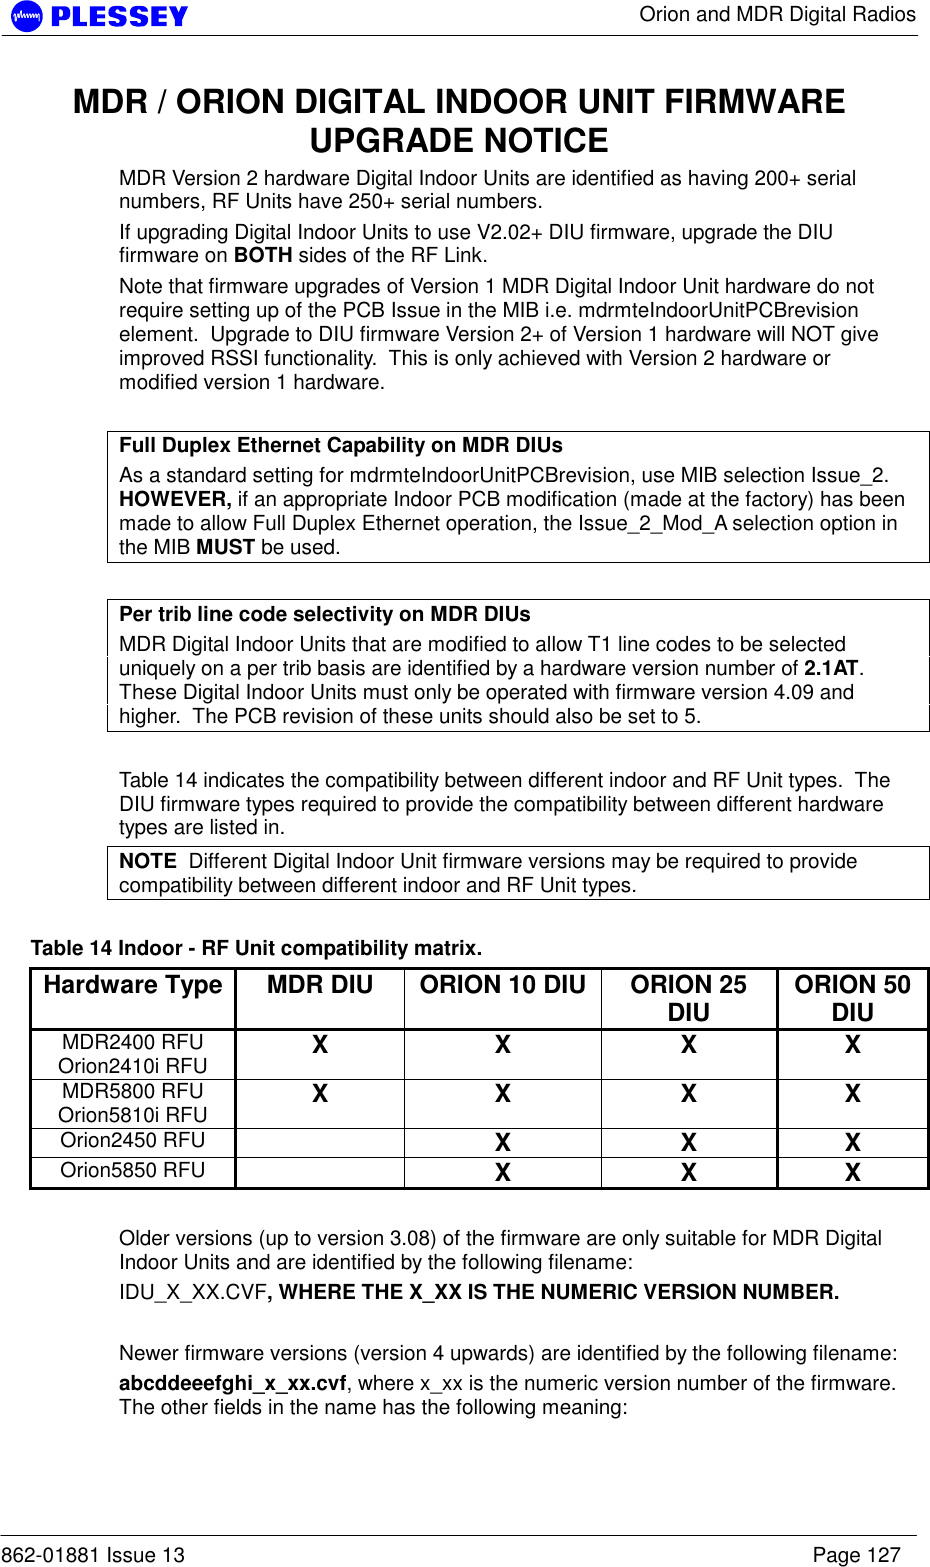      Orion and MDR Digital Radios  862-01881 Issue 13    Page 127 MDR / ORION DIGITAL INDOOR UNIT FIRMWARE UPGRADE NOTICE MDR Version 2 hardware Digital Indoor Units are identified as having 200+ serial numbers, RF Units have 250+ serial numbers. If upgrading Digital Indoor Units to use V2.02+ DIU firmware, upgrade the DIU firmware on BOTH sides of the RF Link. Note that firmware upgrades of Version 1 MDR Digital Indoor Unit hardware do not require setting up of the PCB Issue in the MIB i.e. mdrmteIndoorUnitPCBrevision element.  Upgrade to DIU firmware Version 2+ of Version 1 hardware will NOT give improved RSSI functionality.  This is only achieved with Version 2 hardware or modified version 1 hardware.  Full Duplex Ethernet Capability on MDR DIUs As a standard setting for mdrmteIndoorUnitPCBrevision, use MIB selection Issue_2.  HOWEVER, if an appropriate Indoor PCB modification (made at the factory) has been made to allow Full Duplex Ethernet operation, the Issue_2_Mod_A selection option in the MIB MUST be used.  Per trib line code selectivity on MDR DIUs MDR Digital Indoor Units that are modified to allow T1 line codes to be selected uniquely on a per trib basis are identified by a hardware version number of 2.1AT.  These Digital Indoor Units must only be operated with firmware version 4.09 and higher.  The PCB revision of these units should also be set to 5.  Table 14 indicates the compatibility between different indoor and RF Unit types.  The DIU firmware types required to provide the compatibility between different hardware types are listed in. NOTE  Different Digital Indoor Unit firmware versions may be required to provide compatibility between different indoor and RF Unit types.  Table 14 Indoor - RF Unit compatibility matrix. Hardware Type  MDR DIU  ORION 10 DIU  ORION 25 DIU  ORION 50 DIU MDR2400 RFU Orion2410i RFU  X X X X MDR5800 RFU Orion5810i RFU  X X X X Orion2450 RFU   X X X Orion5850 RFU   X X X  Older versions (up to version 3.08) of the firmware are only suitable for MDR Digital Indoor Units and are identified by the following filename: IDU_X_XX.CVF, WHERE THE X_XX IS THE NUMERIC VERSION NUMBER.  Newer firmware versions (version 4 upwards) are identified by the following filename: abcddeeefghi_x_xx.cvf, where x_xx is the numeric version number of the firmware.  The other fields in the name has the following meaning: 